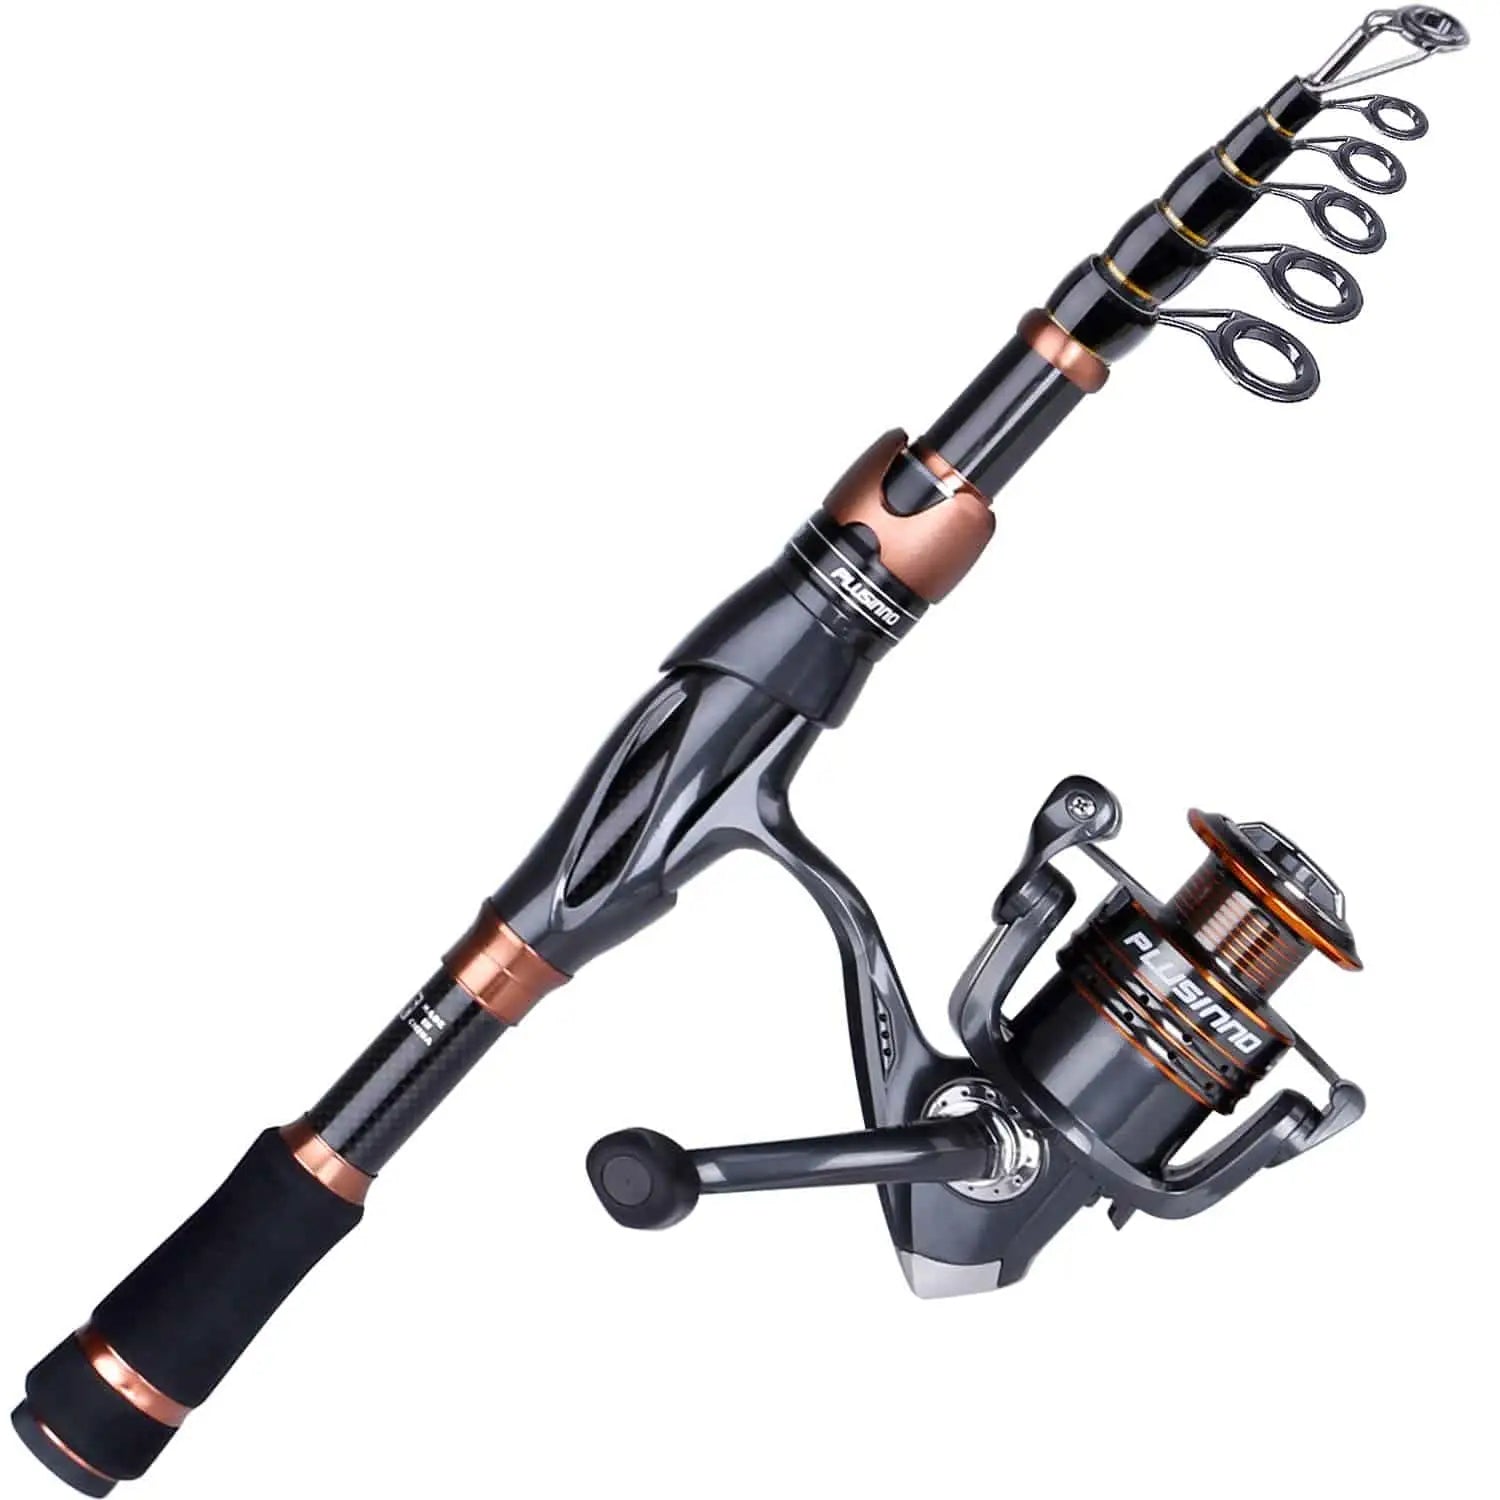  PLUSINNO Fishing Rod and Reel Combos and Floating Fishing Net  for Steelhead Carbon Fiber Telescopic Fishing Rod with Reel Salmon, Fly,  Kayak, Catfish, Bass, Trout Fishing : Sports & Outdoors